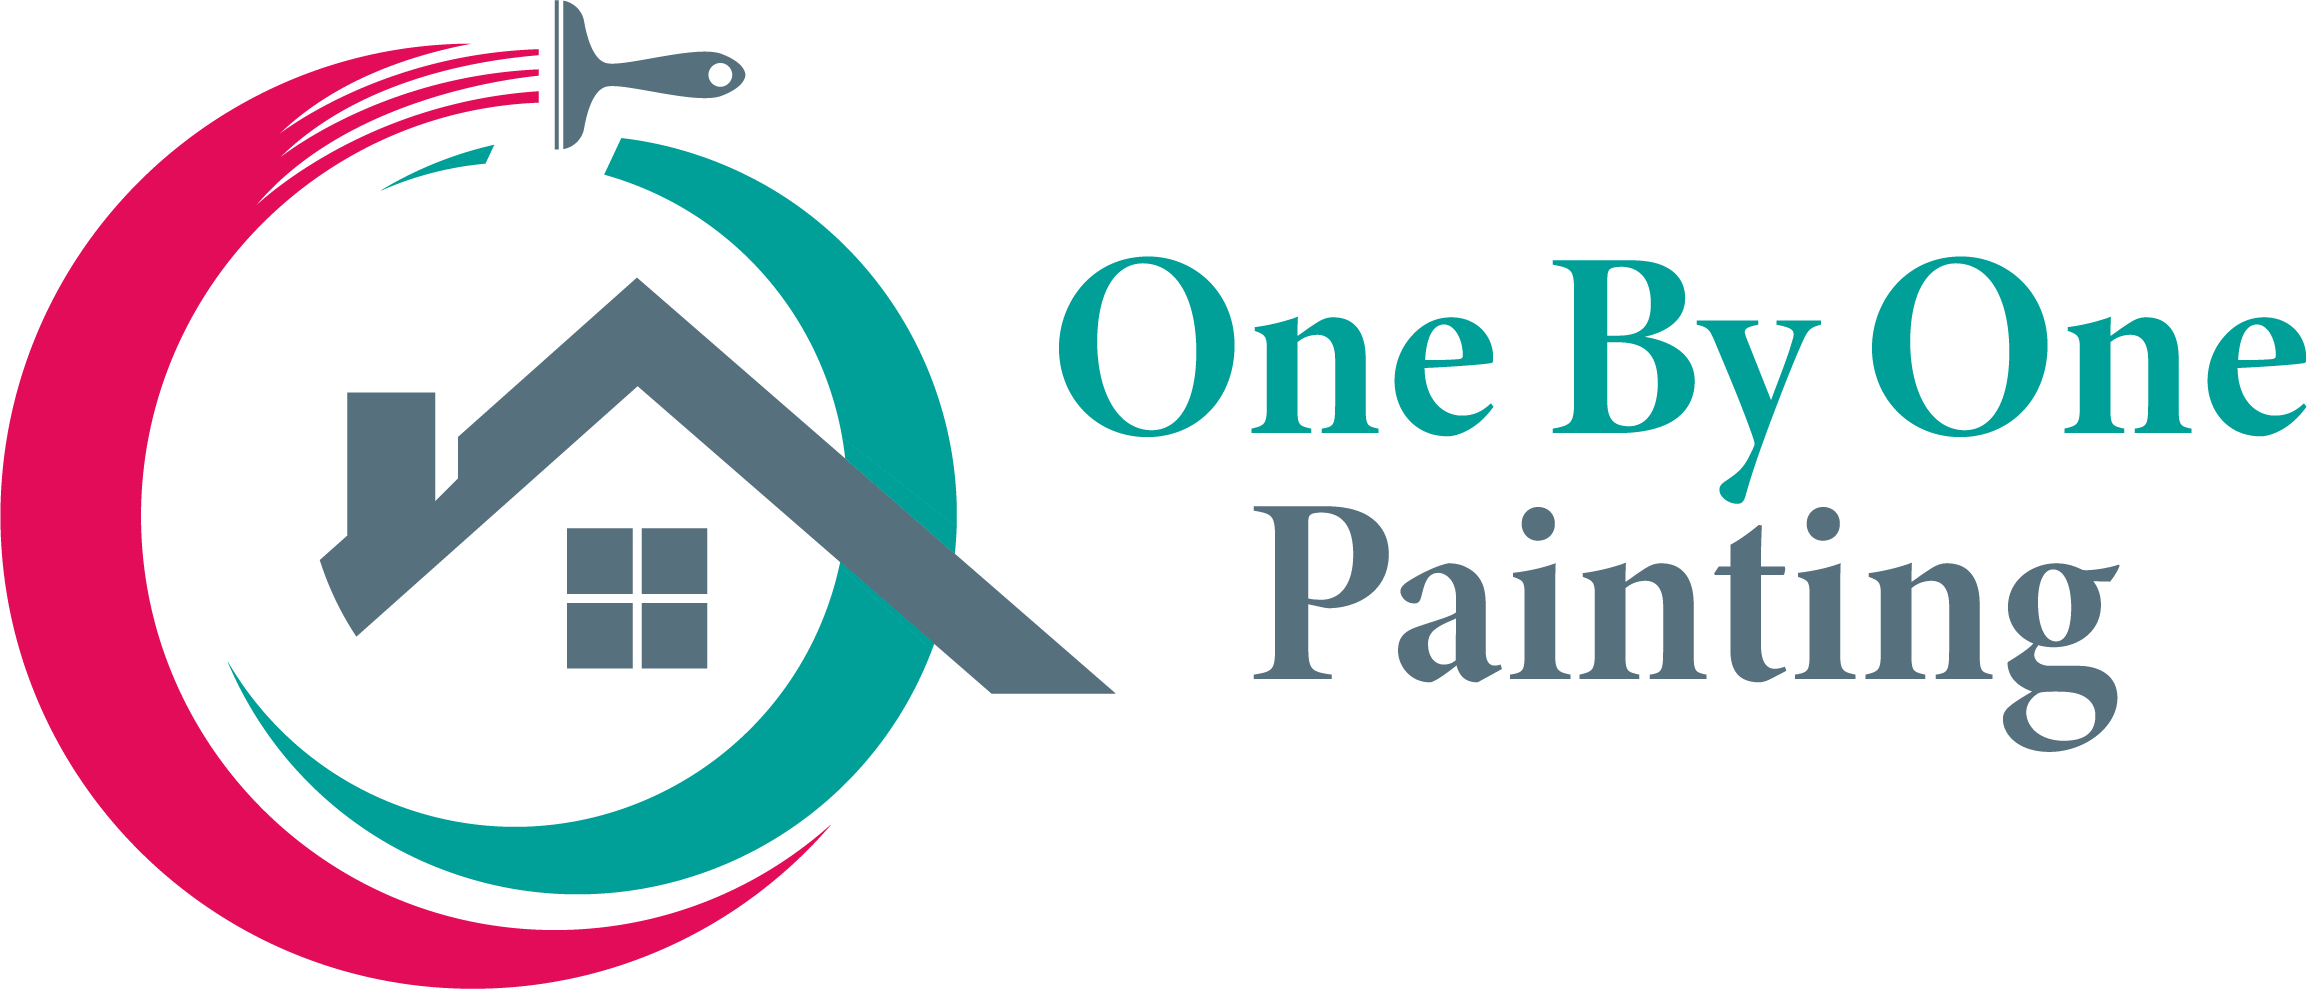 One By One Painting